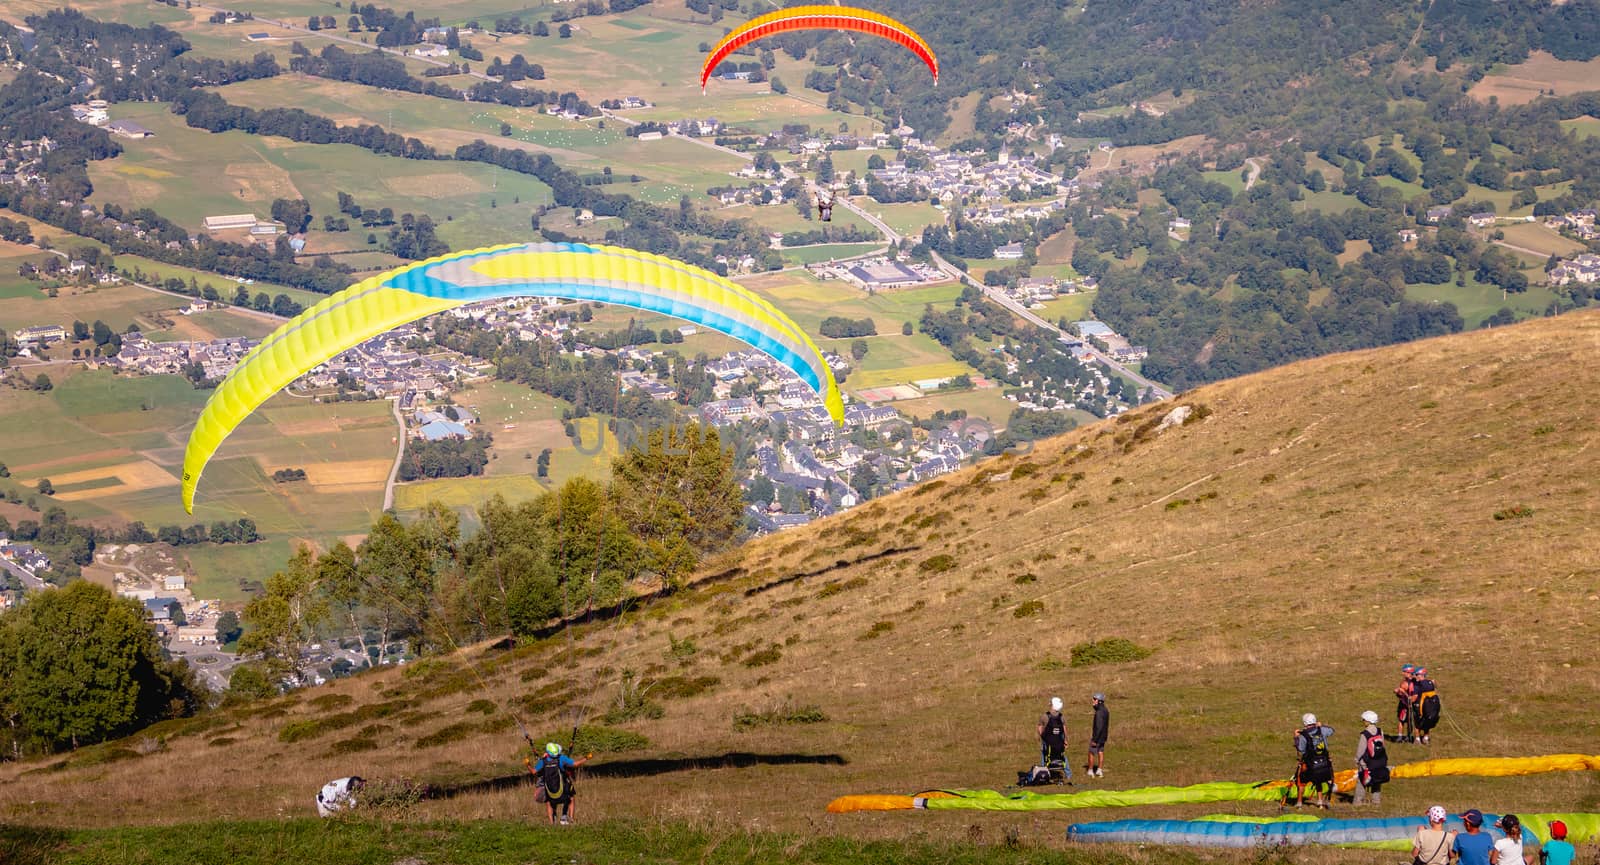 takeoff of a paraglider from the top of the mountain by AtlanticEUROSTOXX